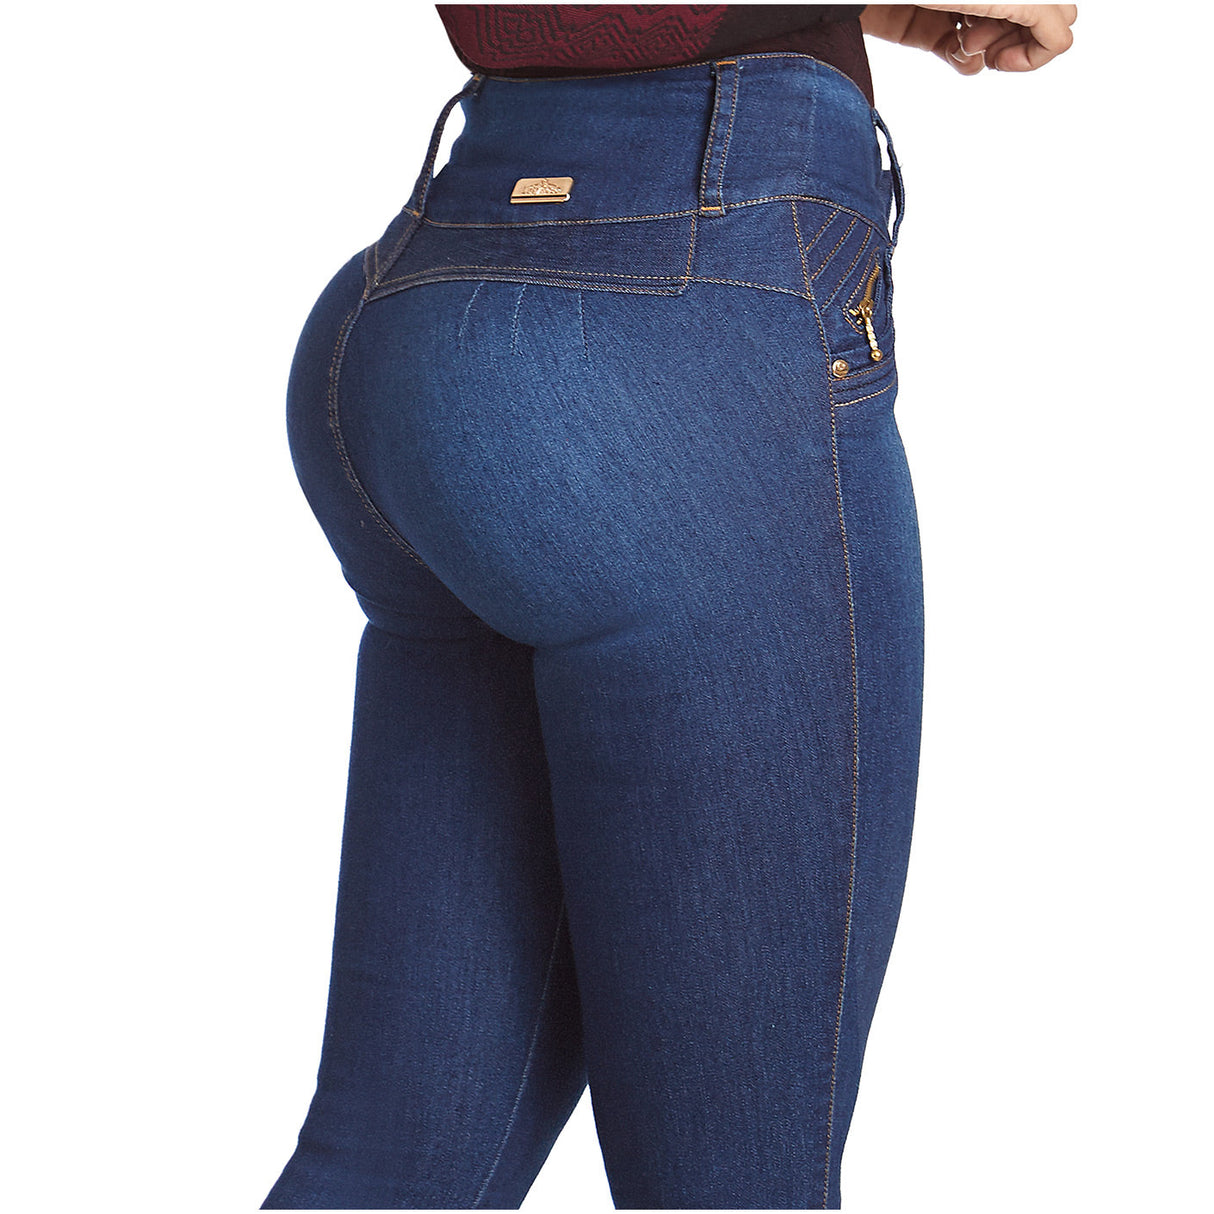 Jeans Colombianos IS3004 – Fajas Colombianas Sale